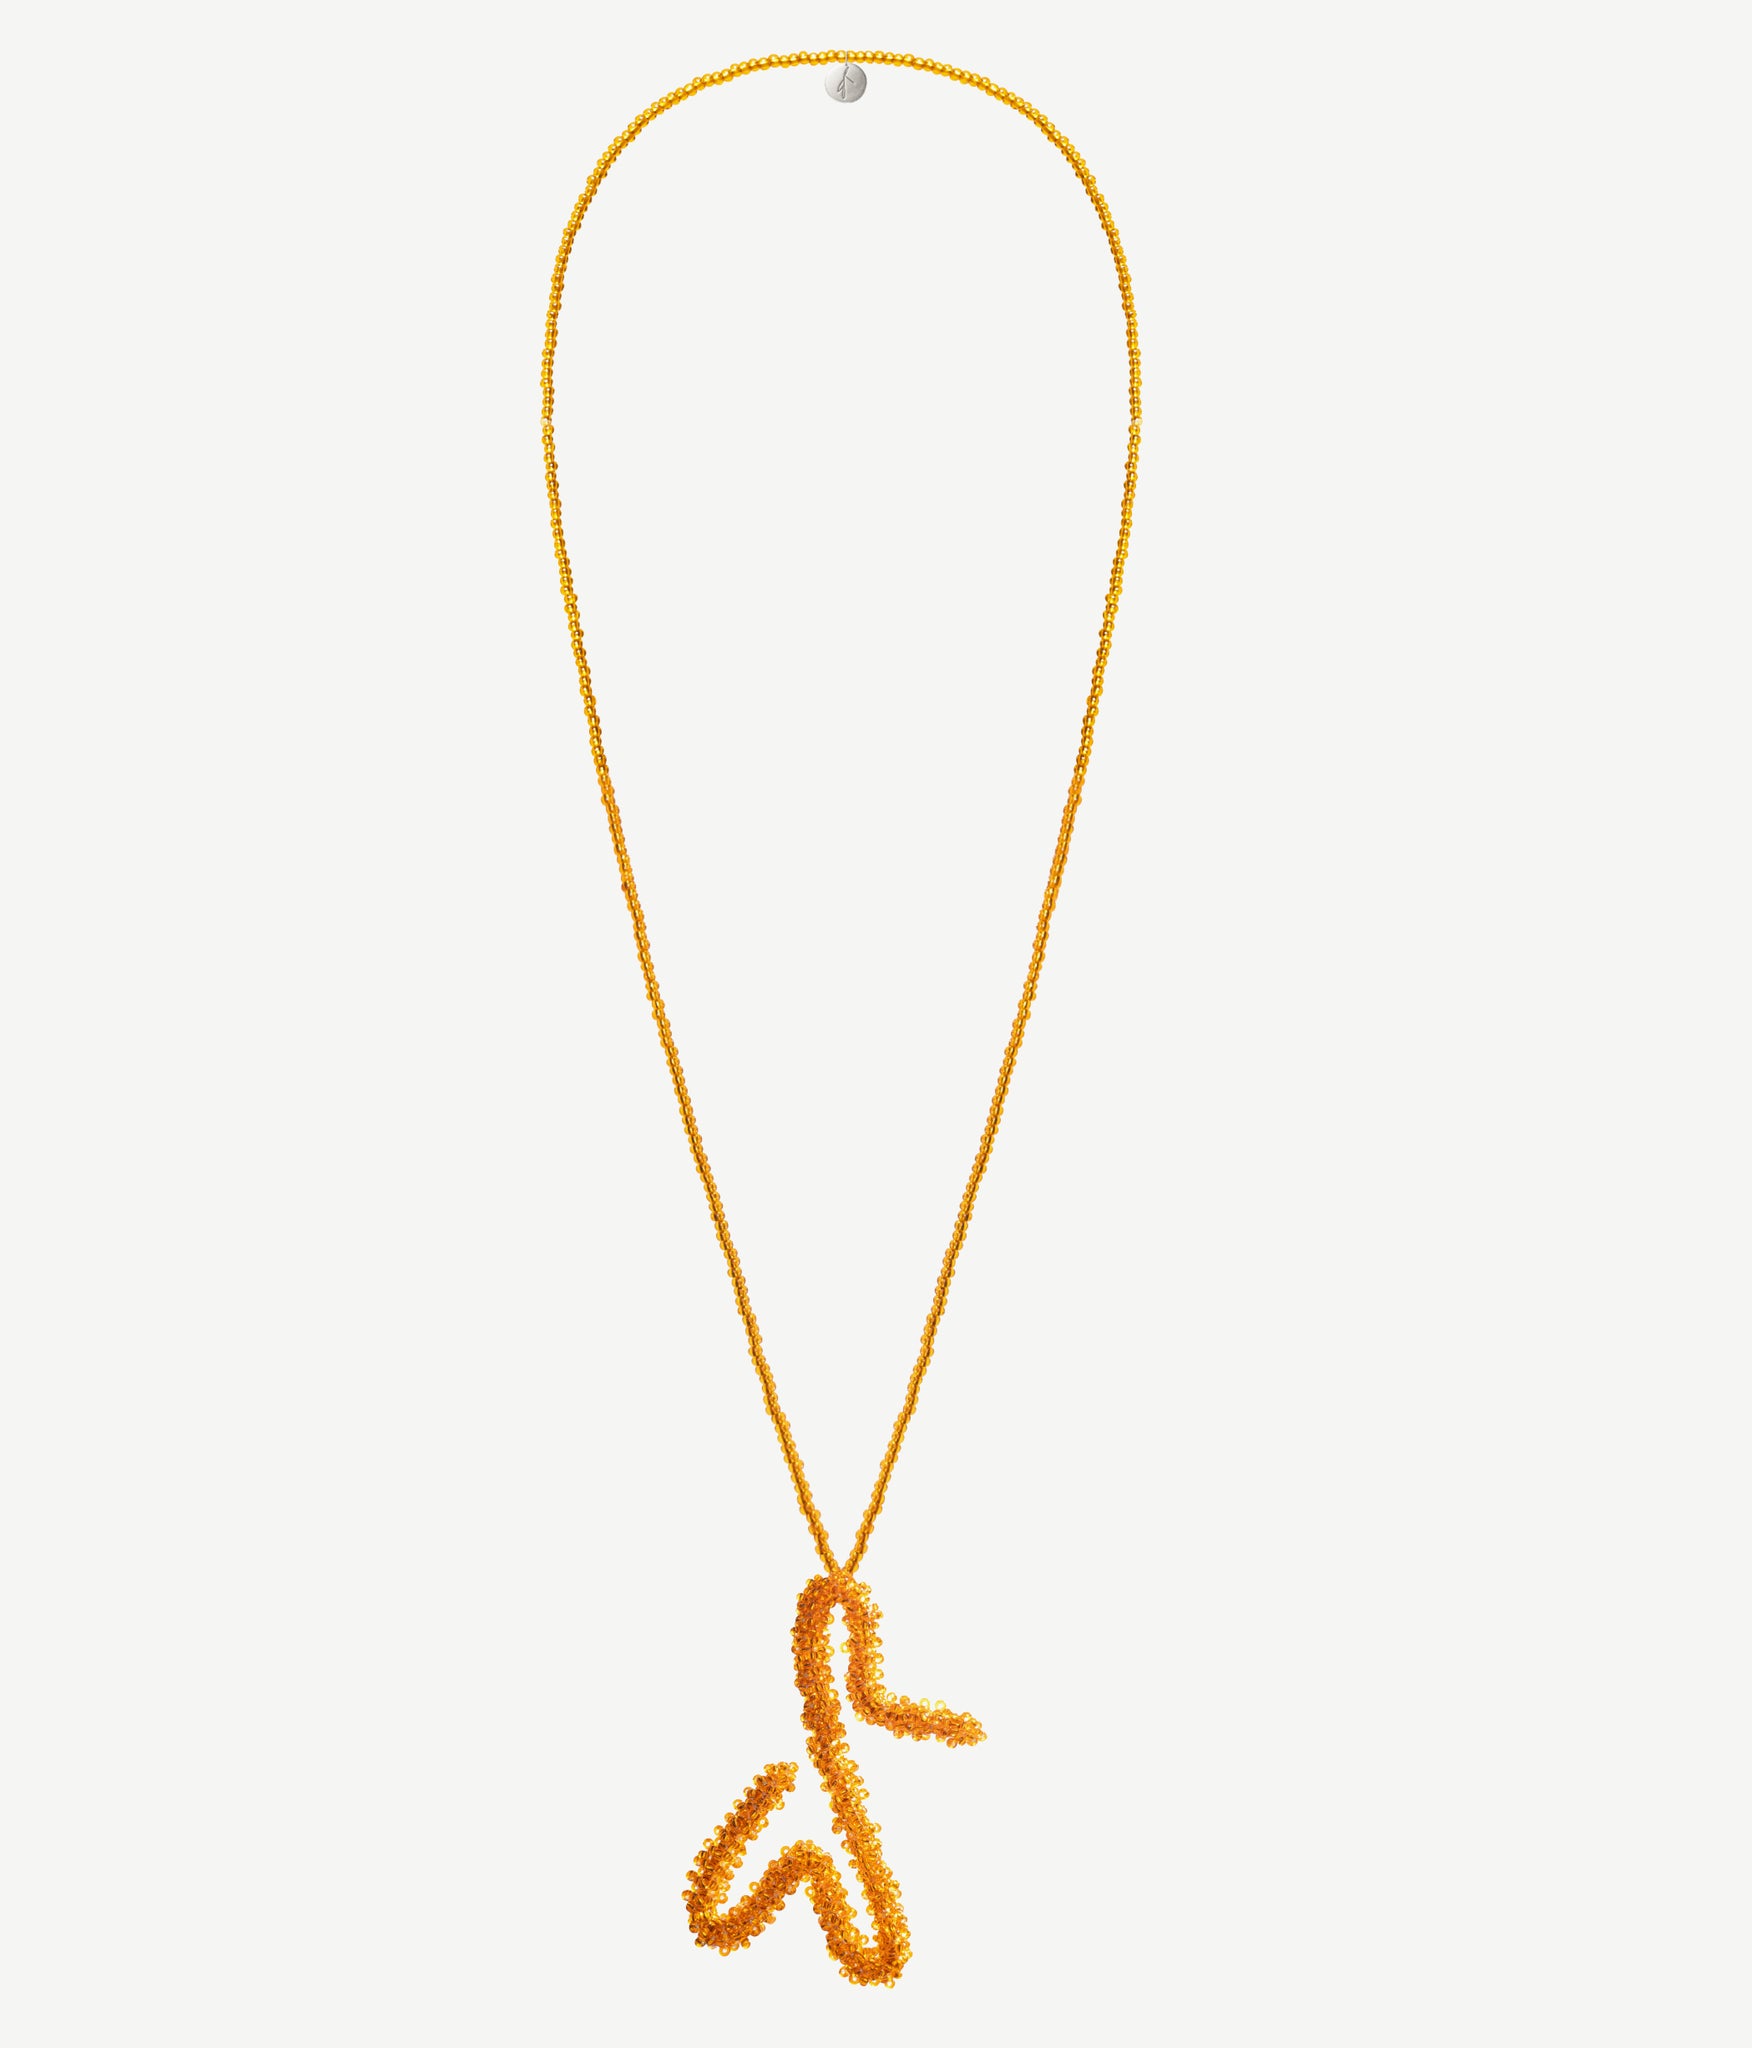 Set of two necklaces — Marigold and Monogram Logo